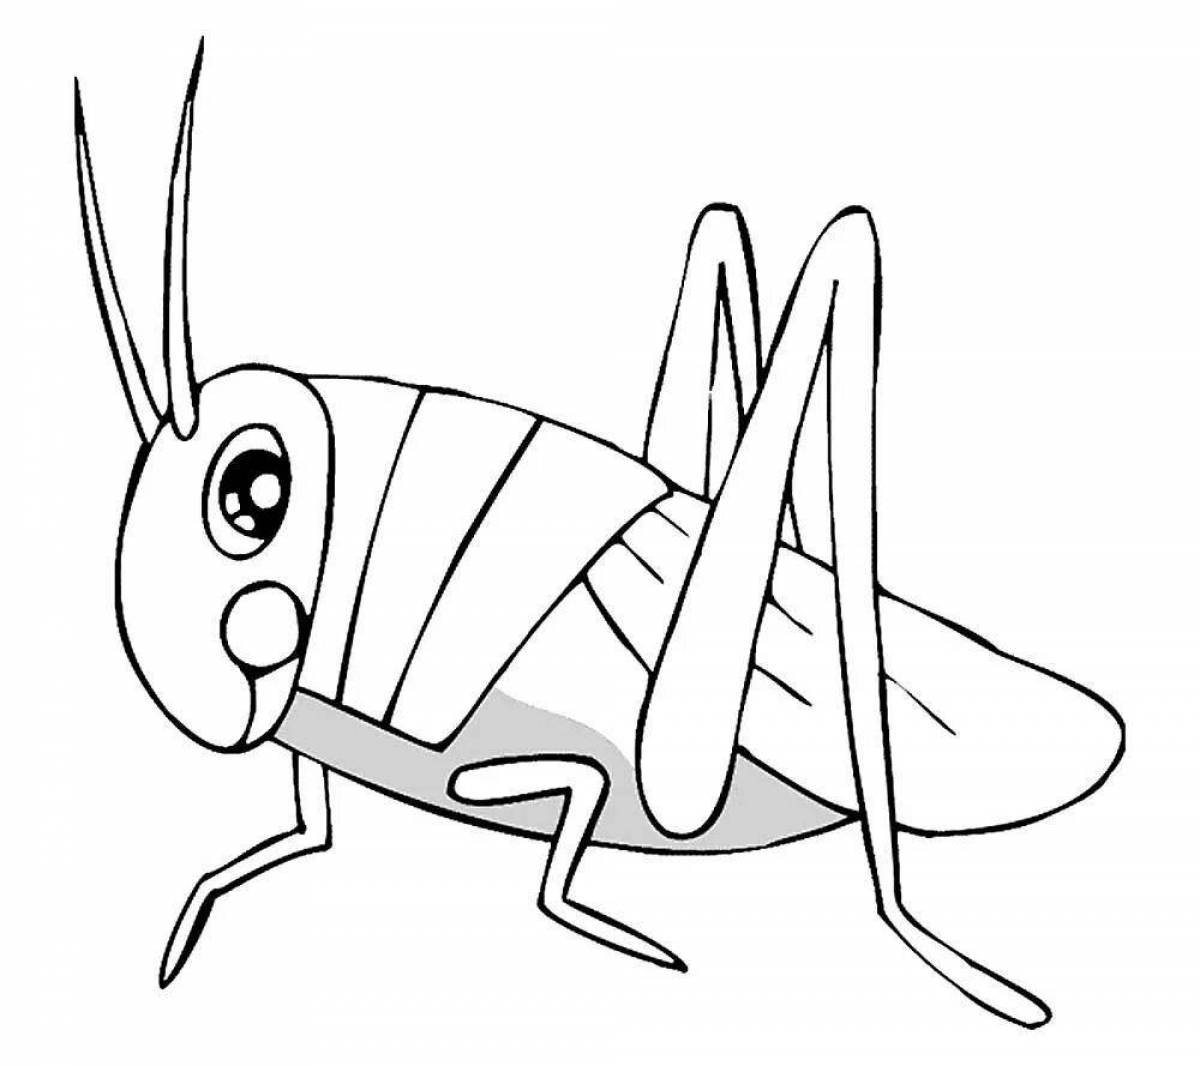 Colorful cricket coloring page